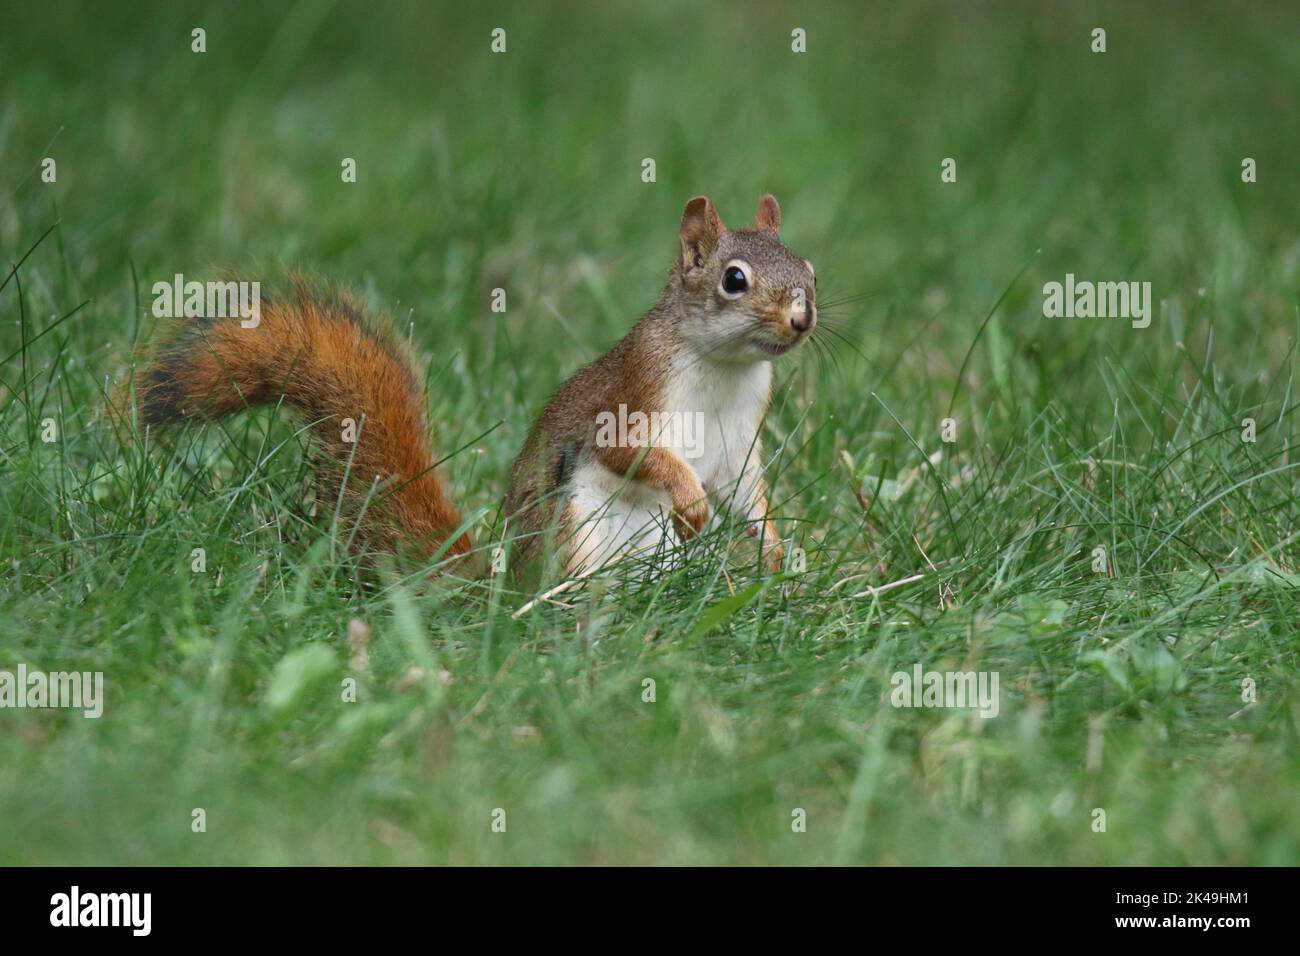 Red squirrel Tamiasciurus hudsonicus out foraging for food in grass in a back yard in Fall Stock Photo